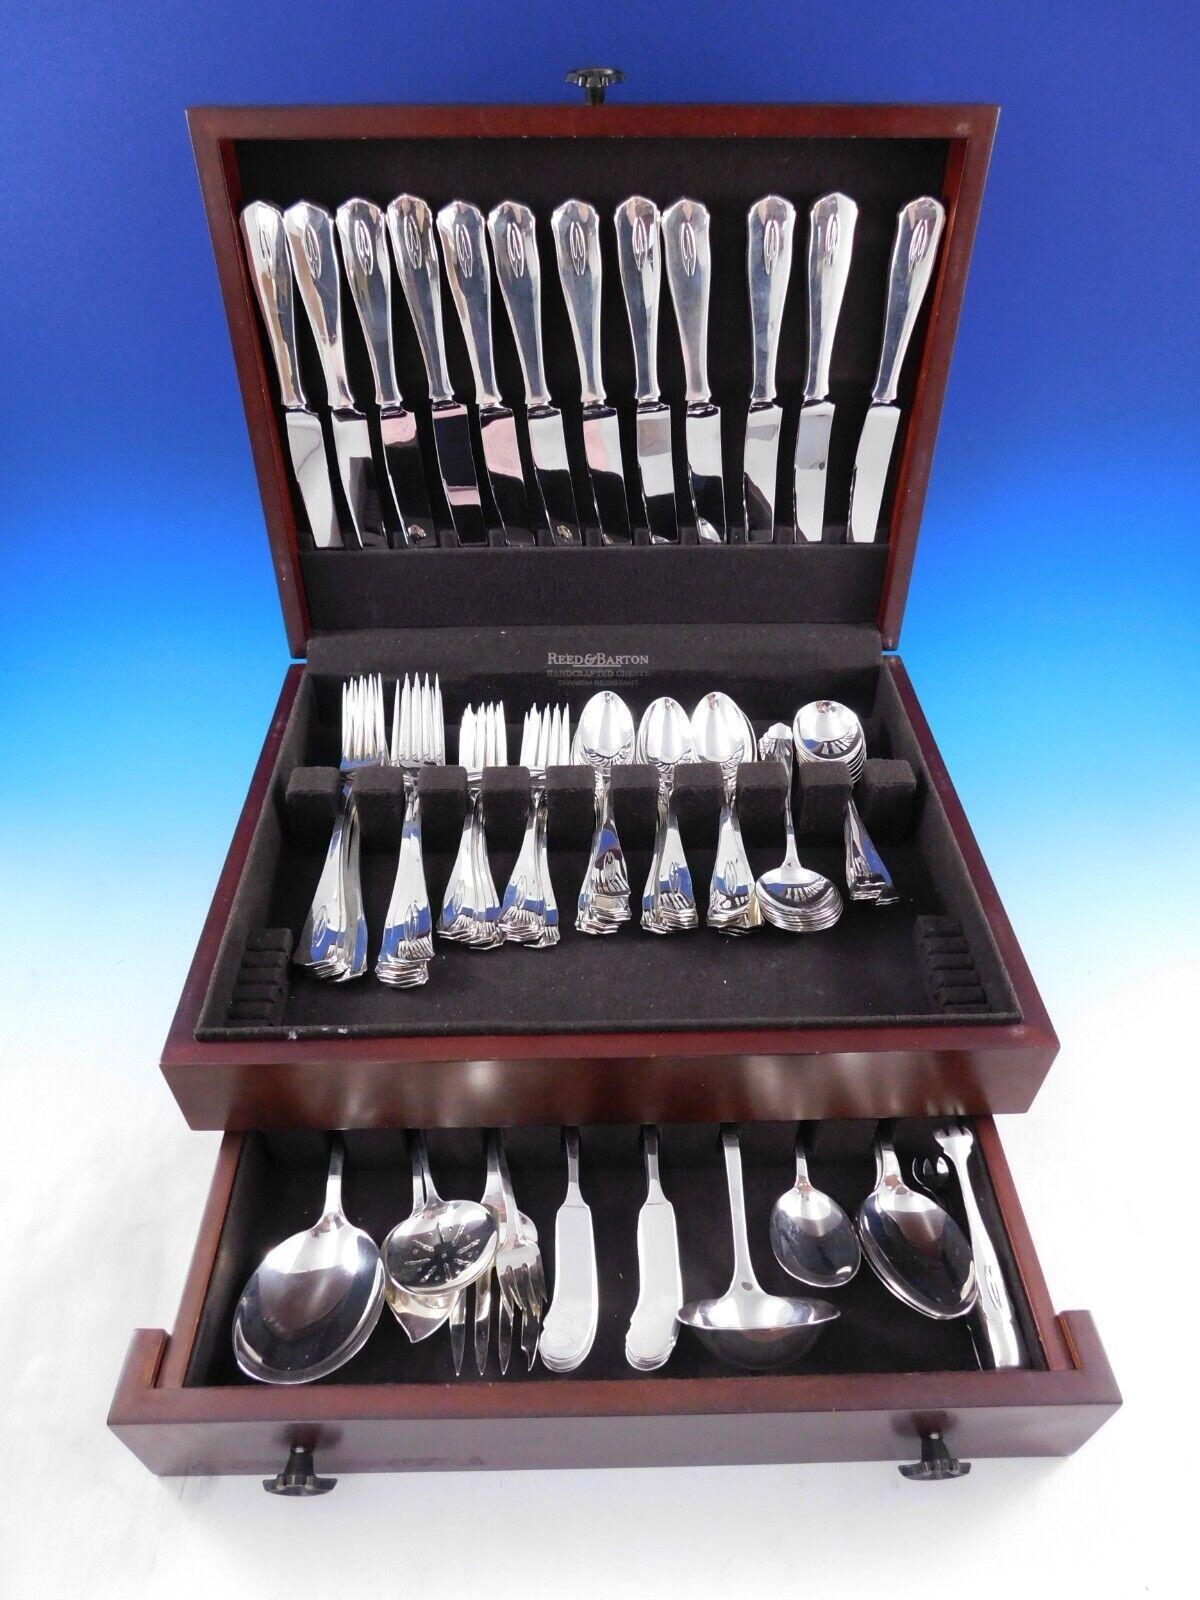 Ramona by Shreve sterling silver Dinner size Flatware set - 96 pieces. This Arts & Crafts pattern was introduced in the year 1912. This set includes:
12 Dinner Size Knives, 9 3/4